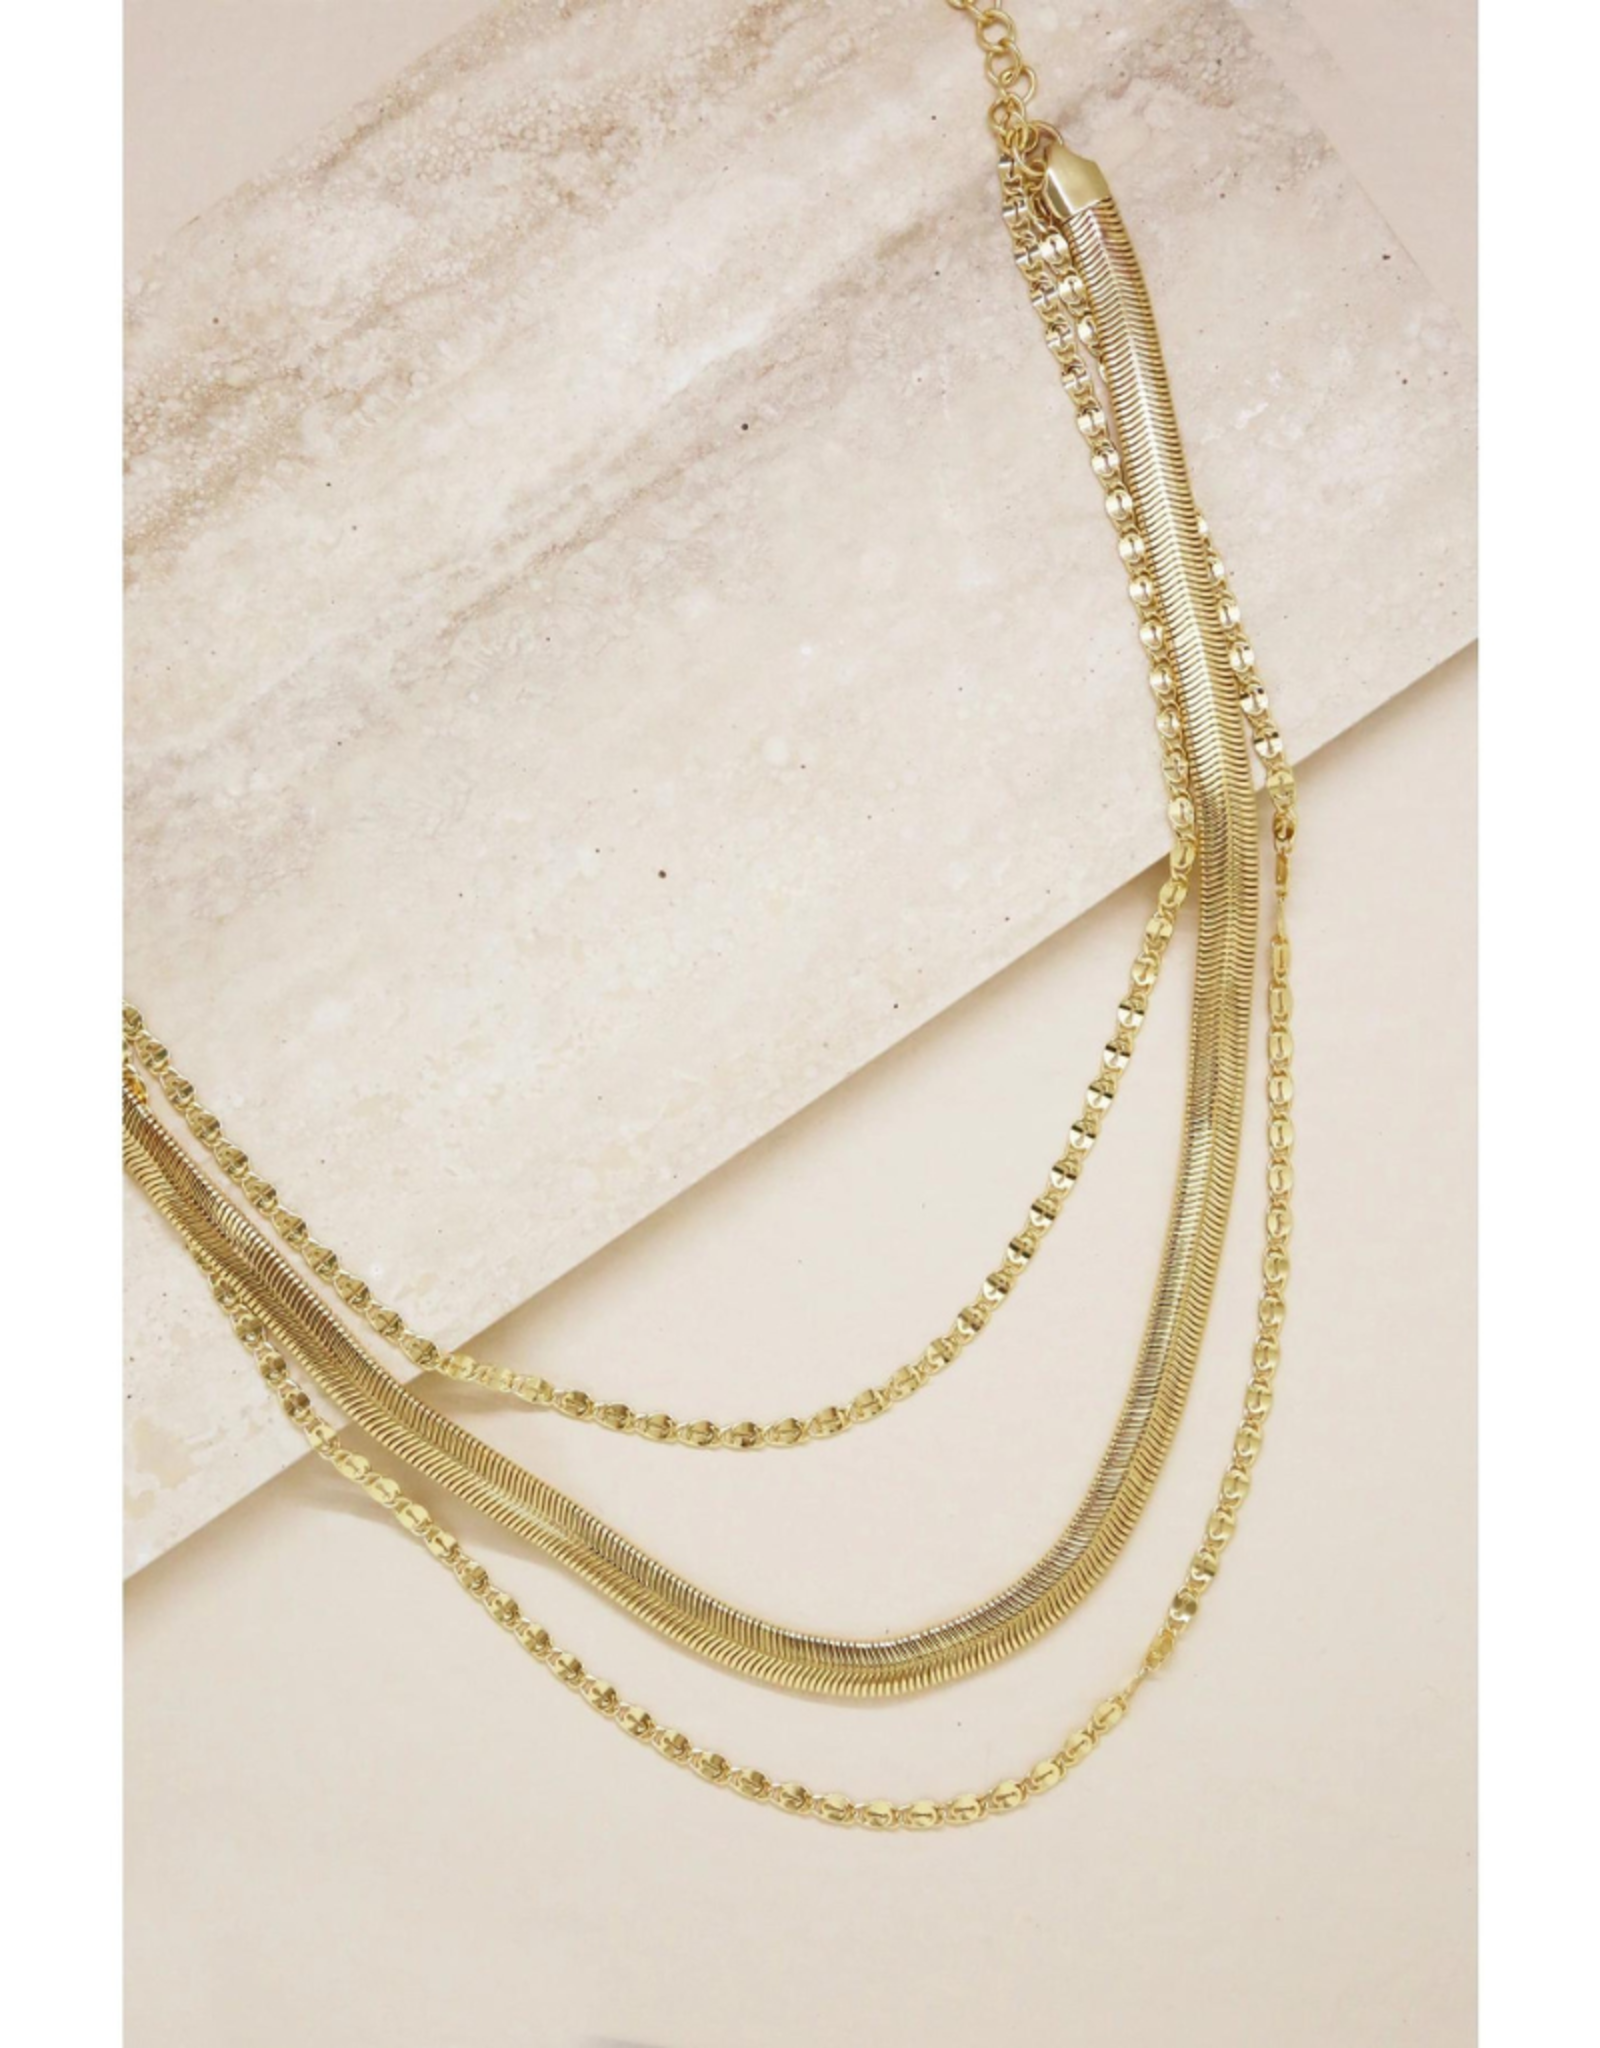 NECKLACE-LAYERED CHAINS-SUPREME